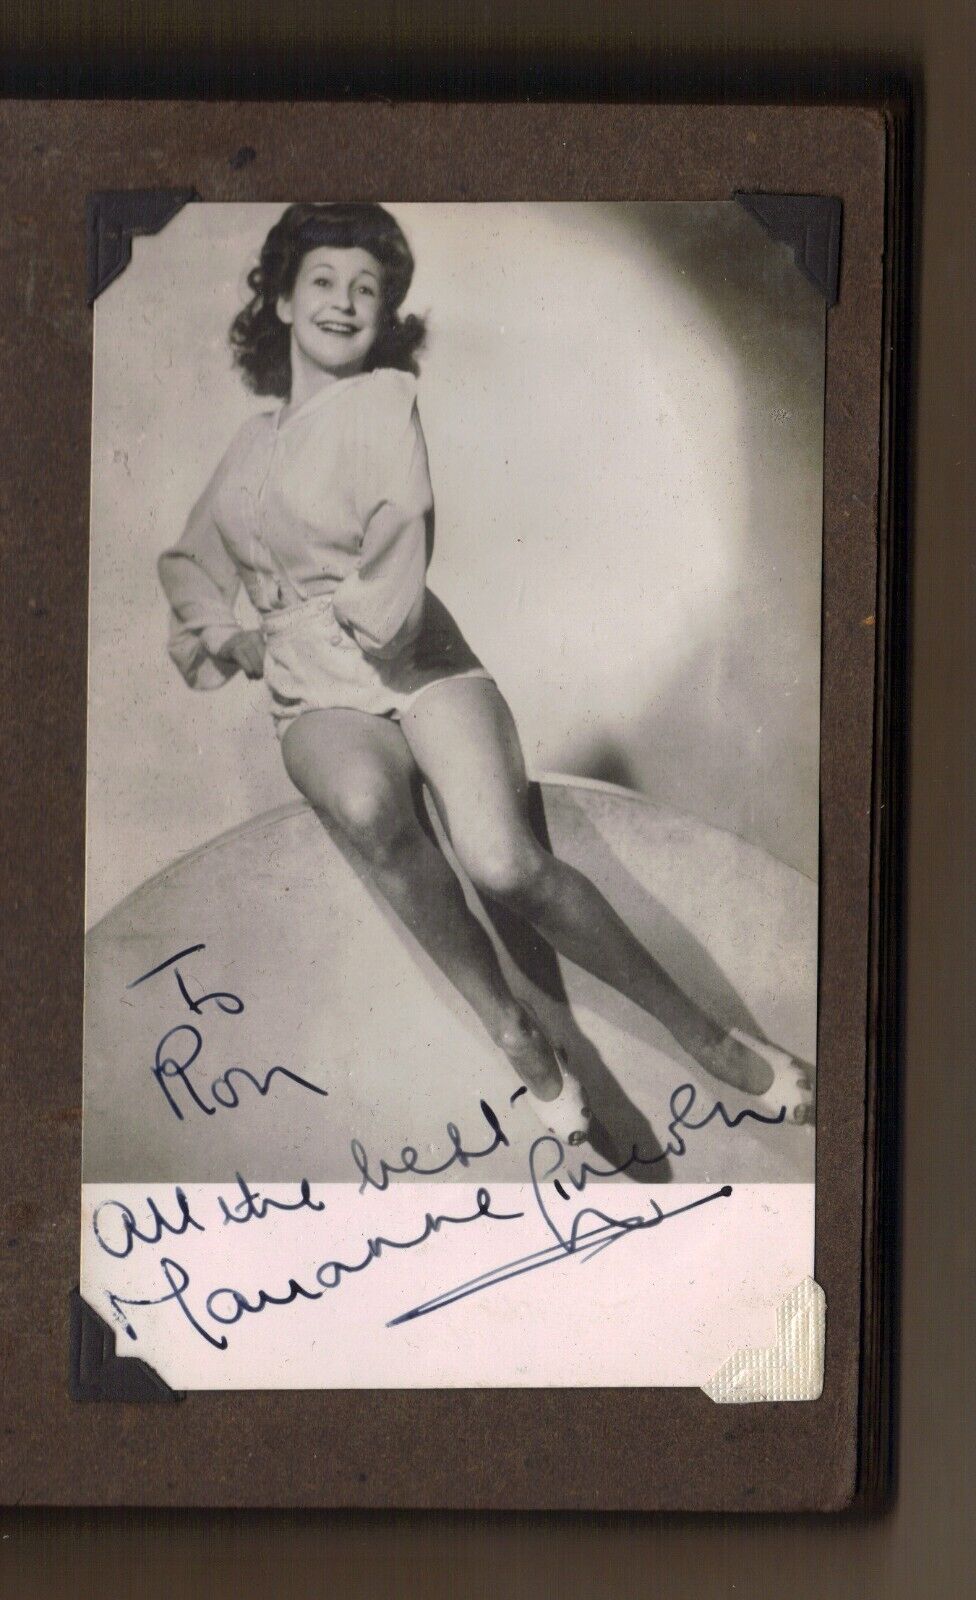 MARIANNE LINCOLN - ORIGINAL HAND-SIGNED PHOTO  1949  COMEDY ACTRESS